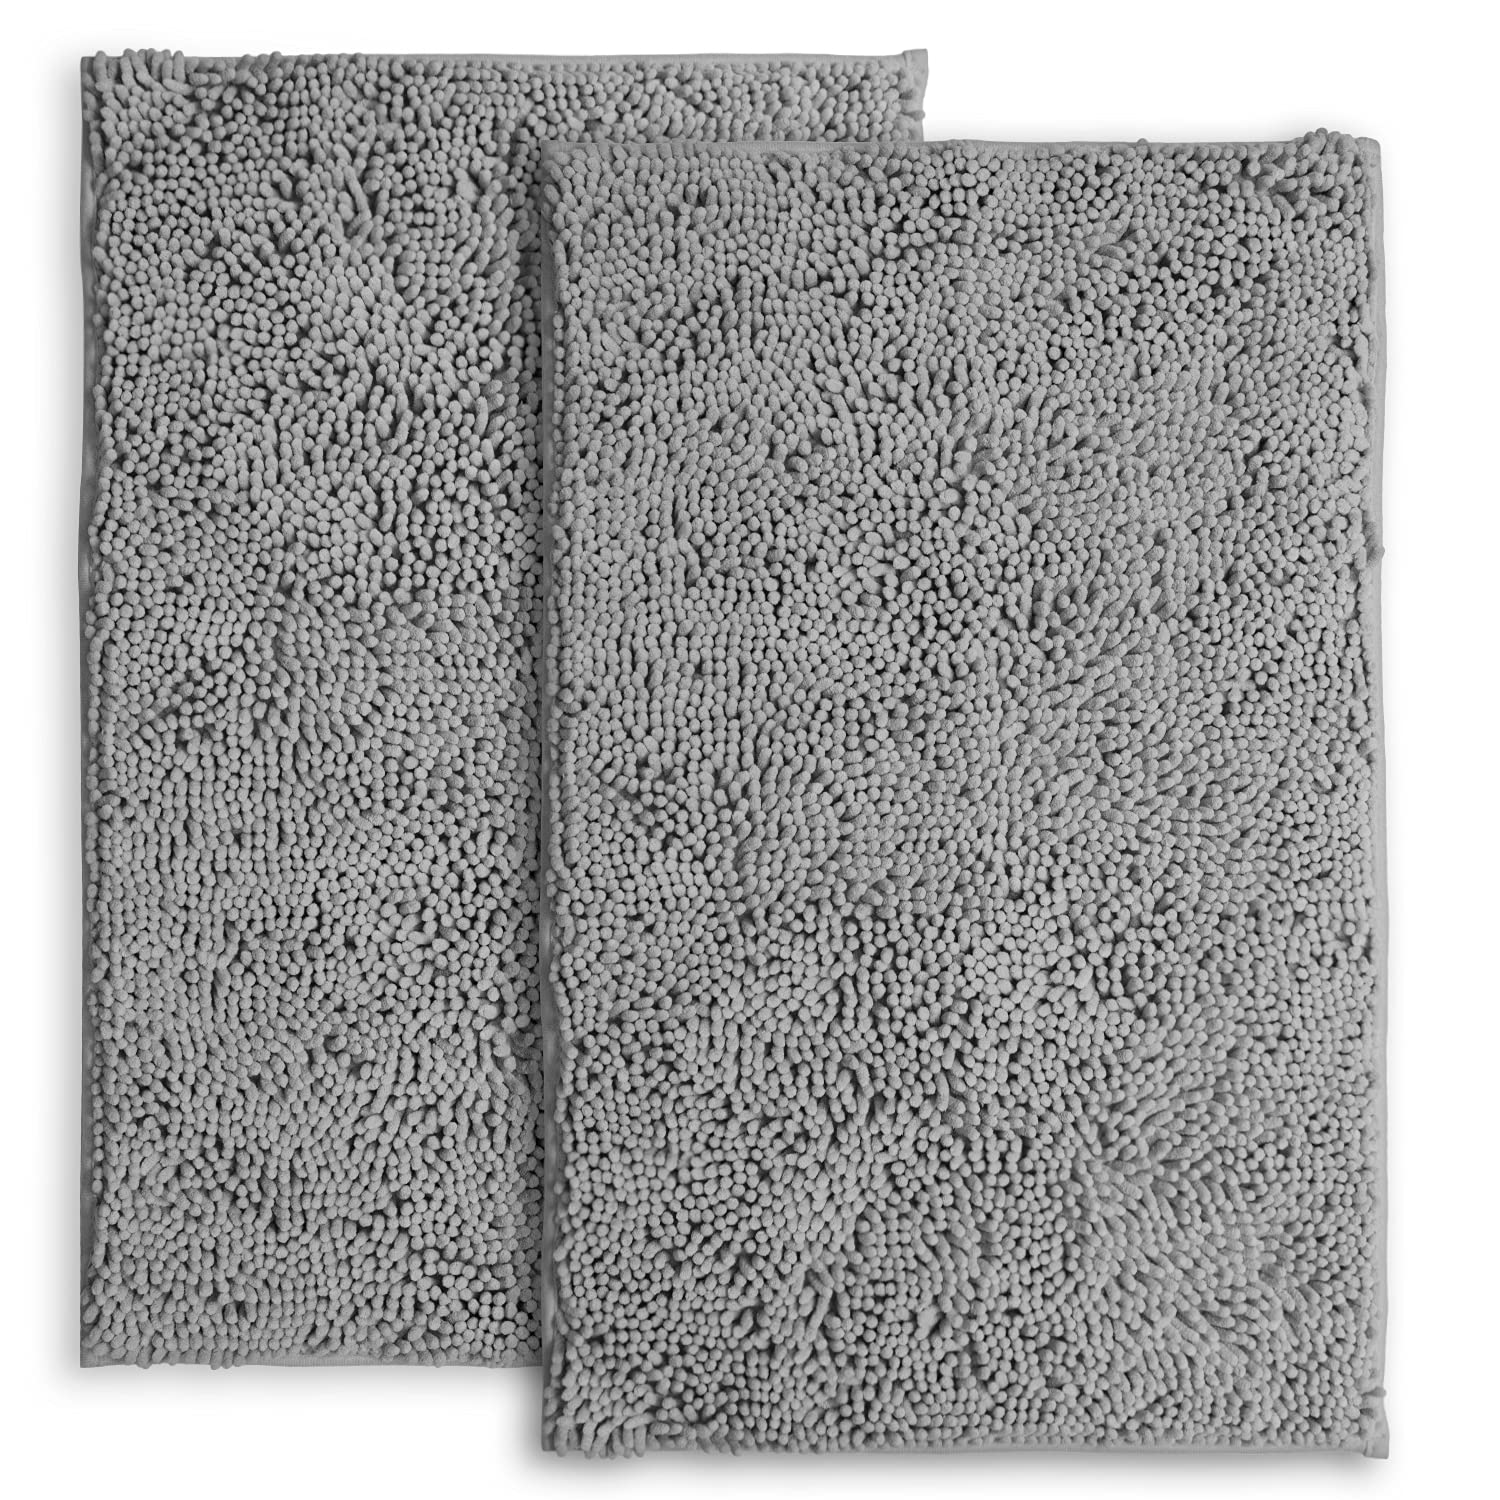 LuxUrux Bathroom Rugs Sets 2 Piece - Plush Bath Mat Set Quick-Dry Soft Chenille Bathroom Mat with Rubber Backing, Absorbant Bathroom Rug Set, Washable  - Like New